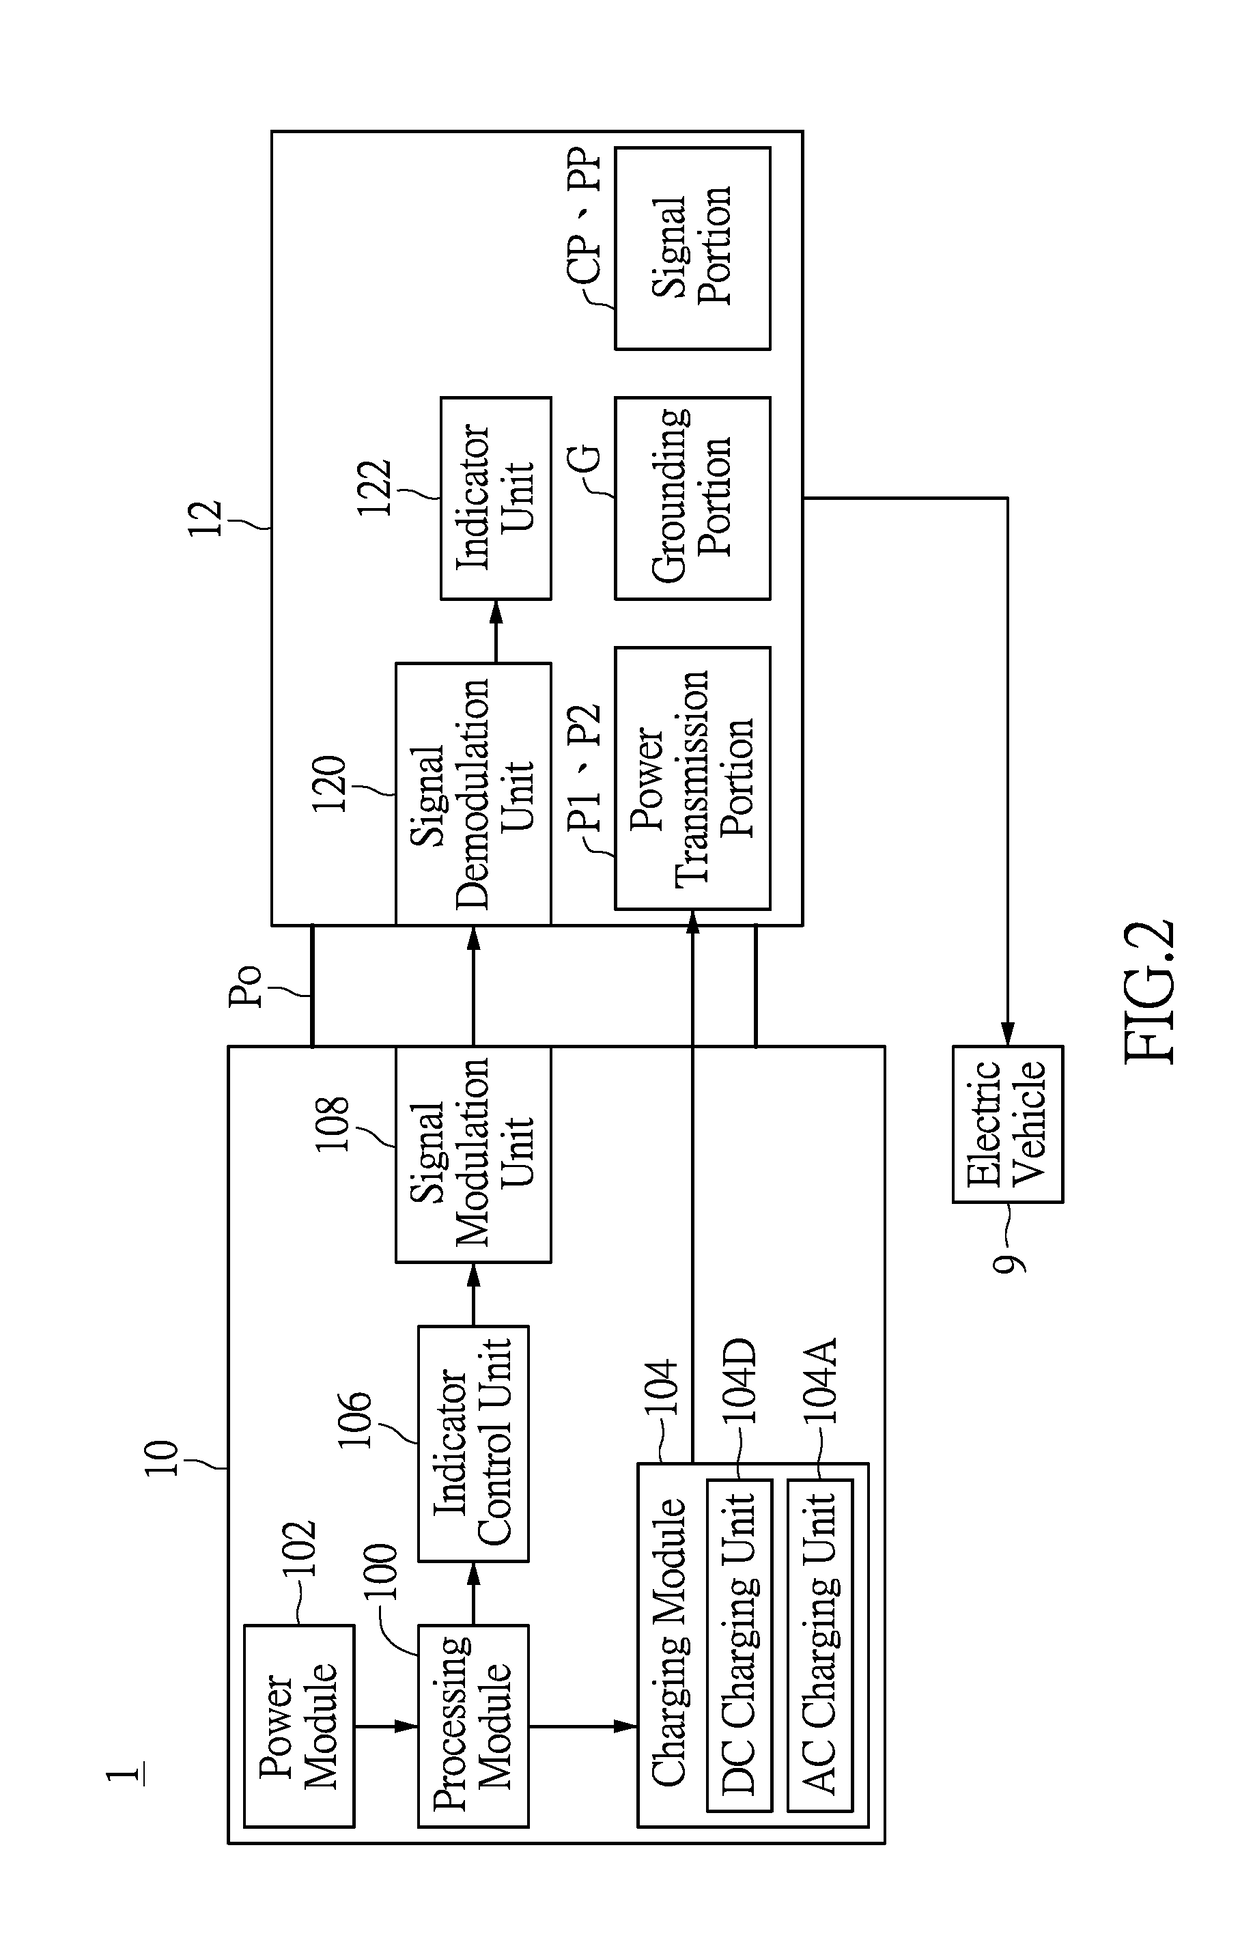 Charging apparatus with status indication